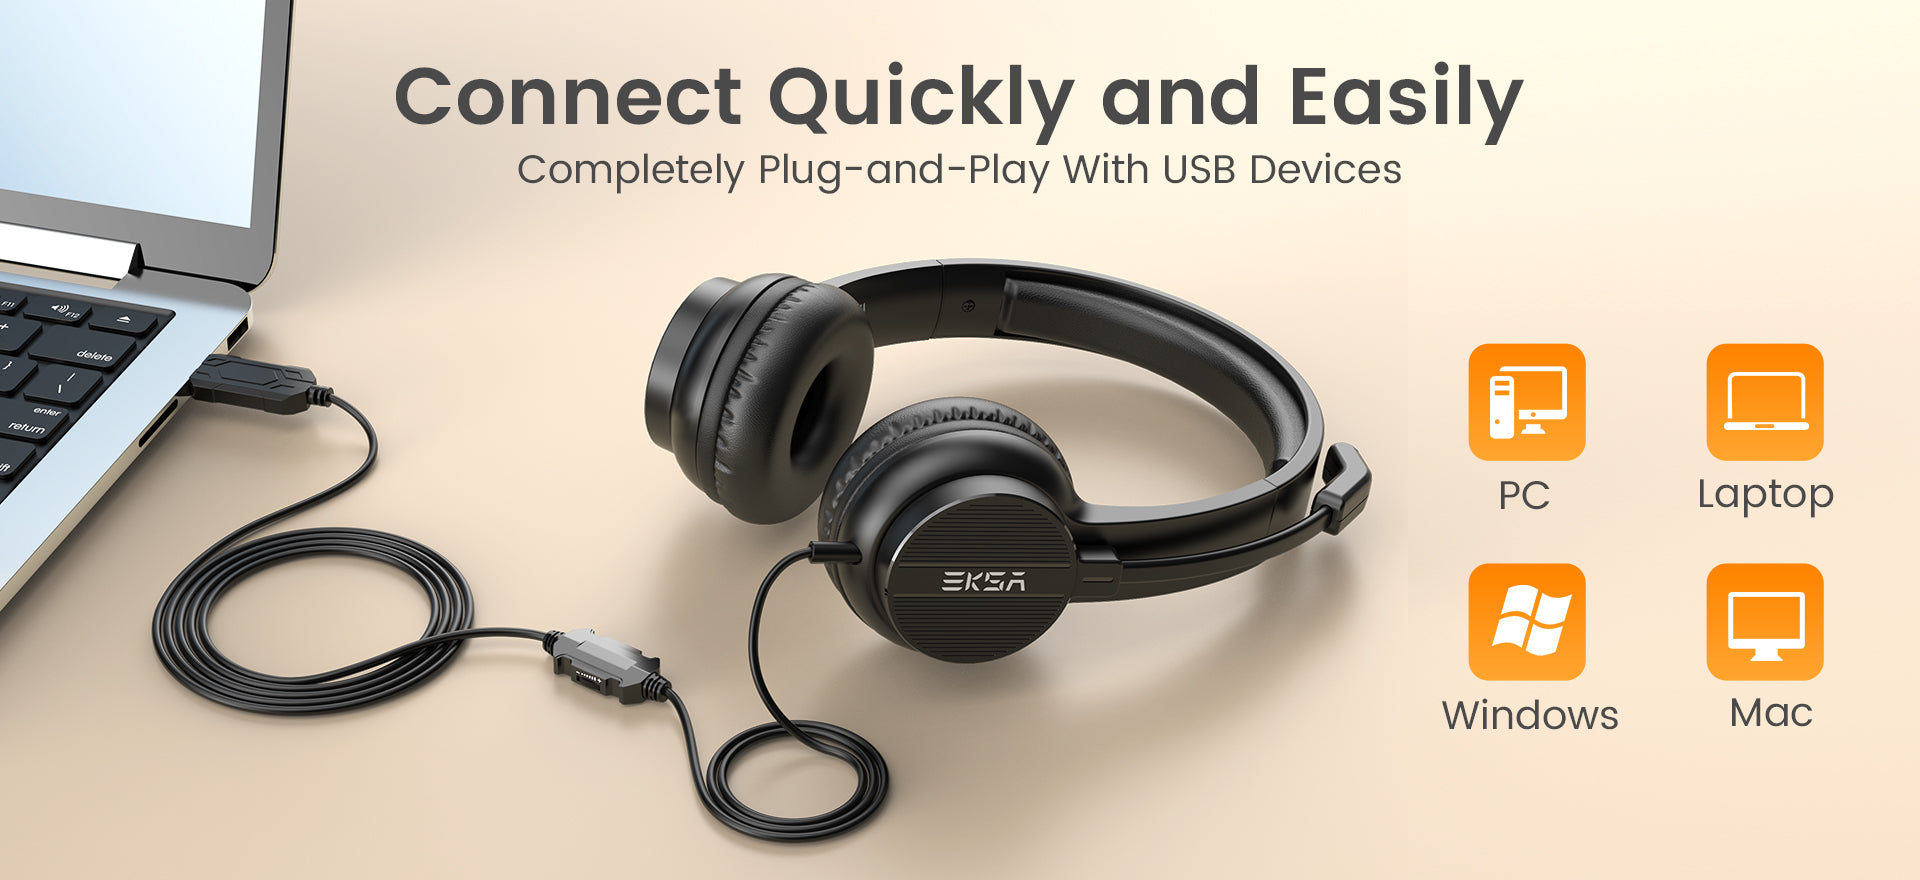 USB Wide Compatibility: Compatible with USB-A interface, ideal for PCs, laptops, and devices supporting Windows or Mac OS.